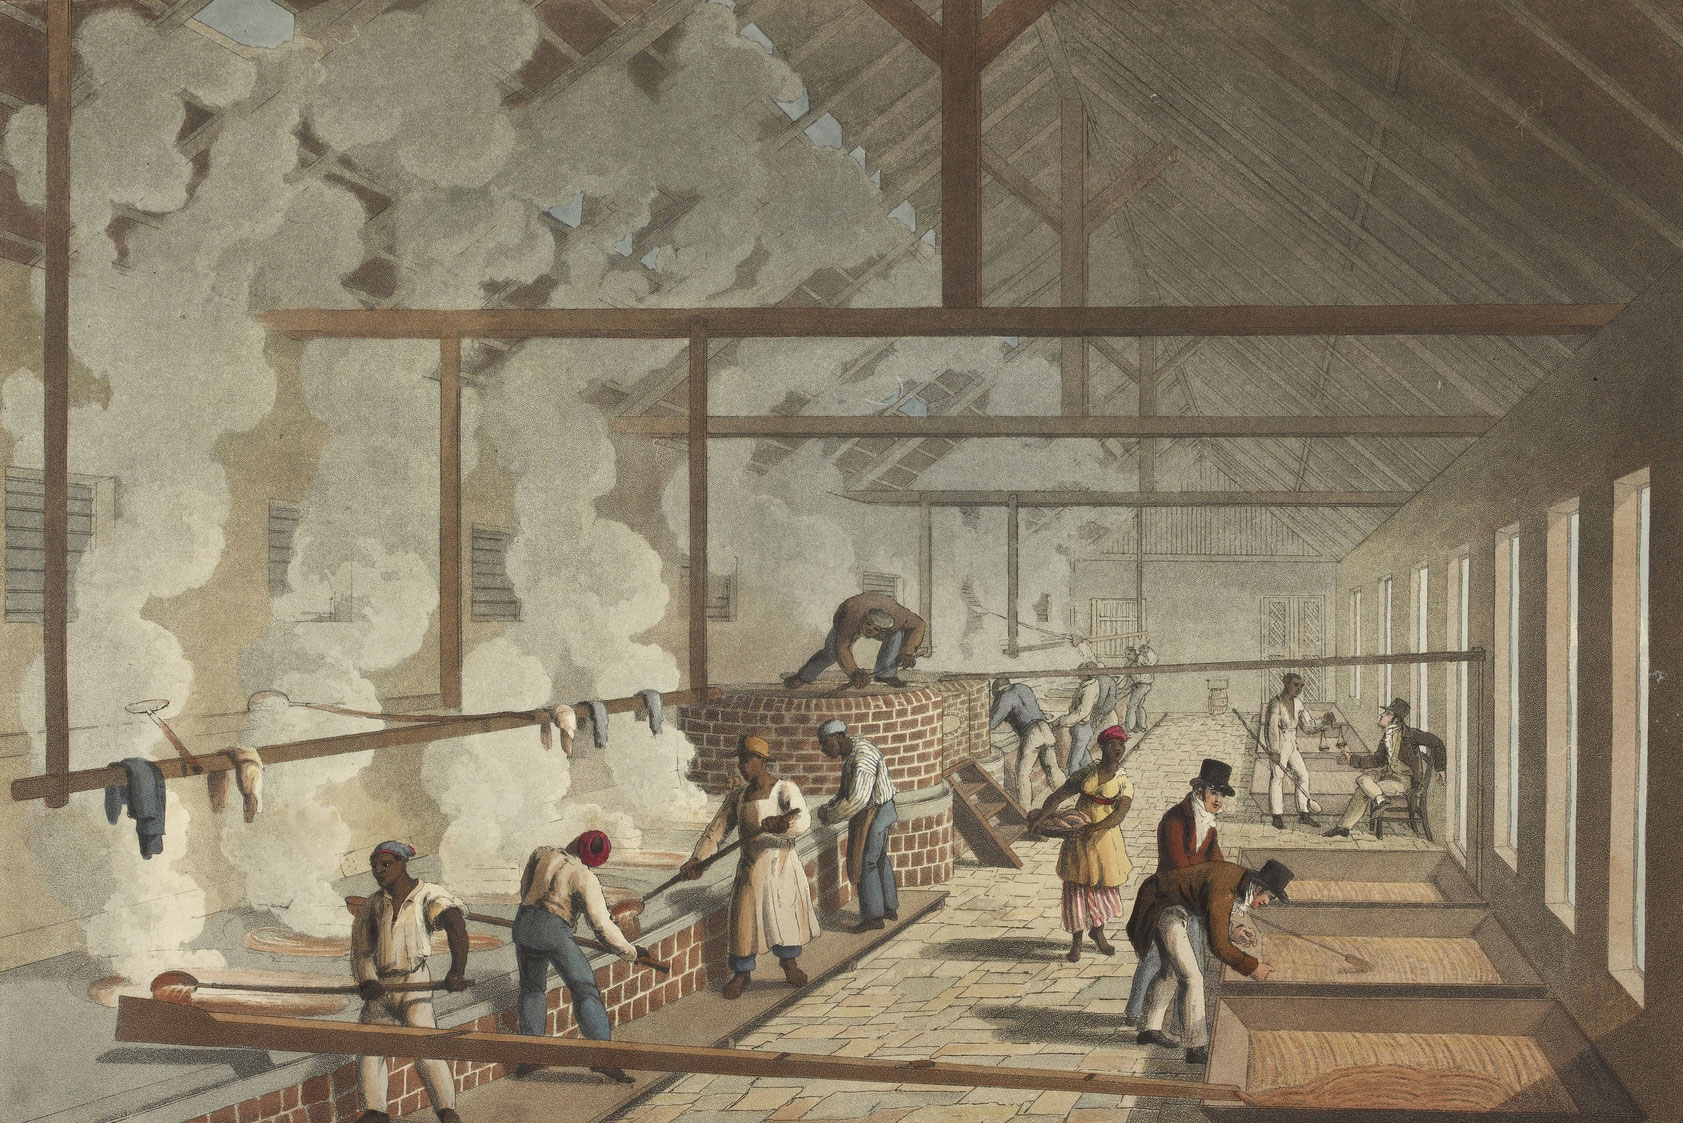 Illustration of a boiling house on Antigua in the early 1800's. On the left, enslaved Black people can be seen boiling cane juice in coppers, or open pans. On the right, white men (possibly overseers) are examining solidifying raw sugar, or muscovado. Other people can be seen working or talking in the background.